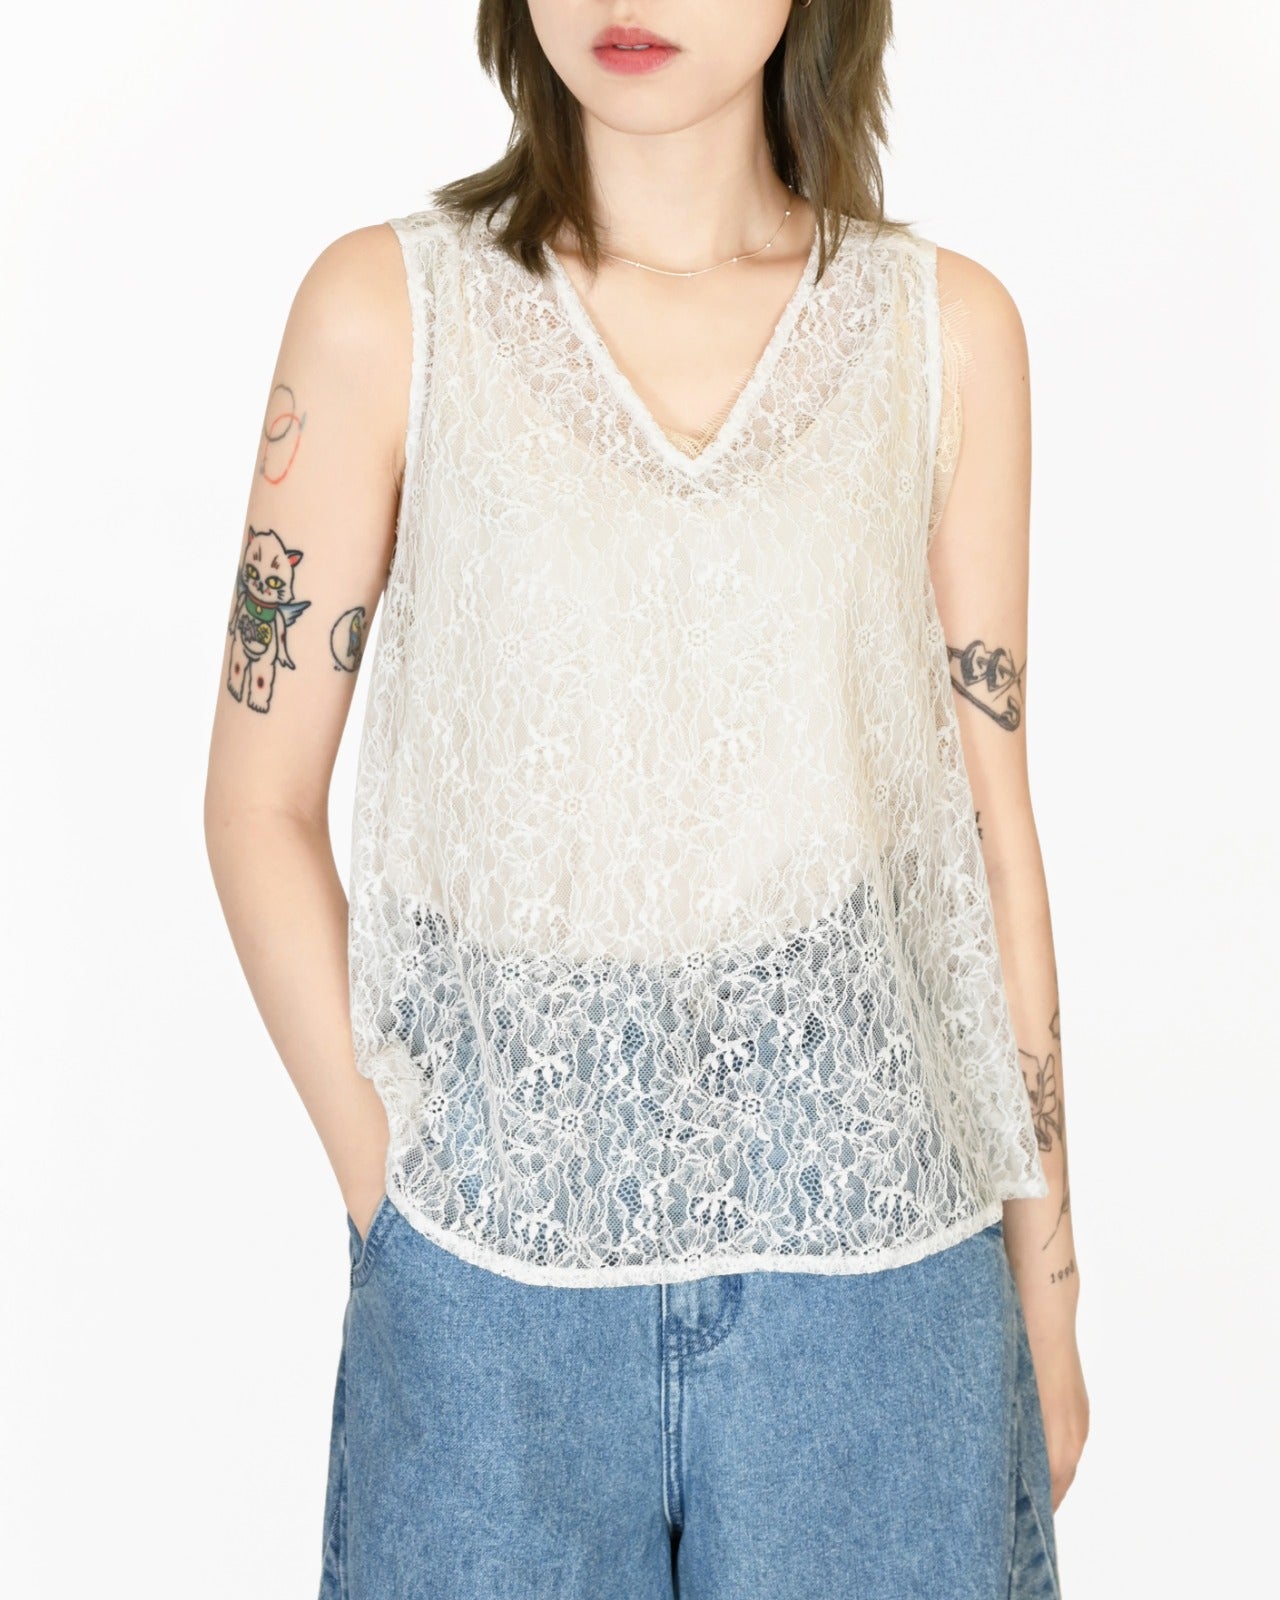 aalis JOLIE ruching shoulder top (White lace)